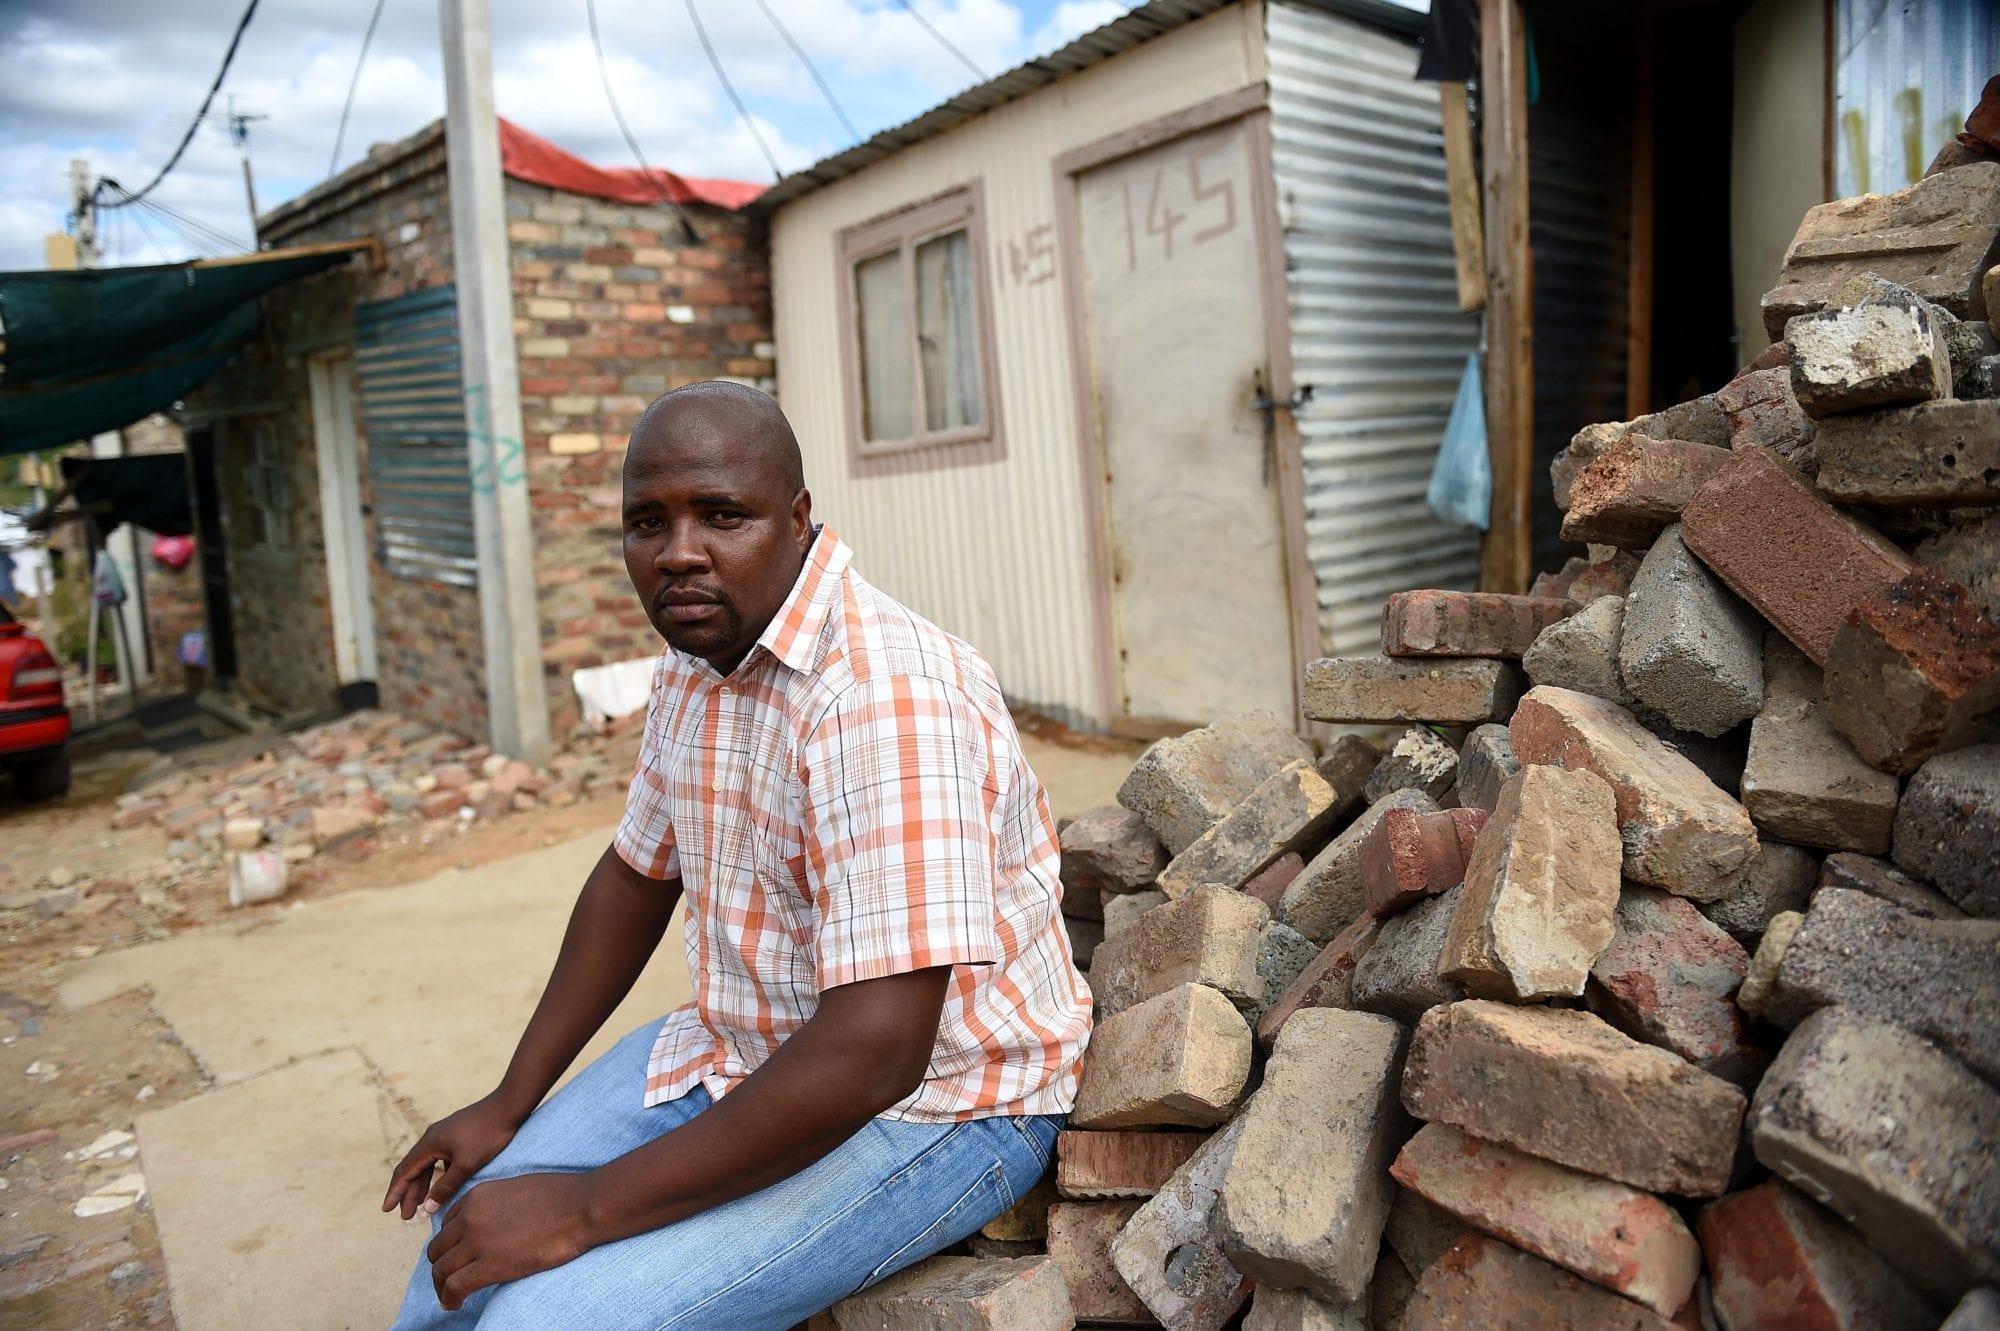 Migrant Mine Worker in South Africa: ‘We Have Nothing’